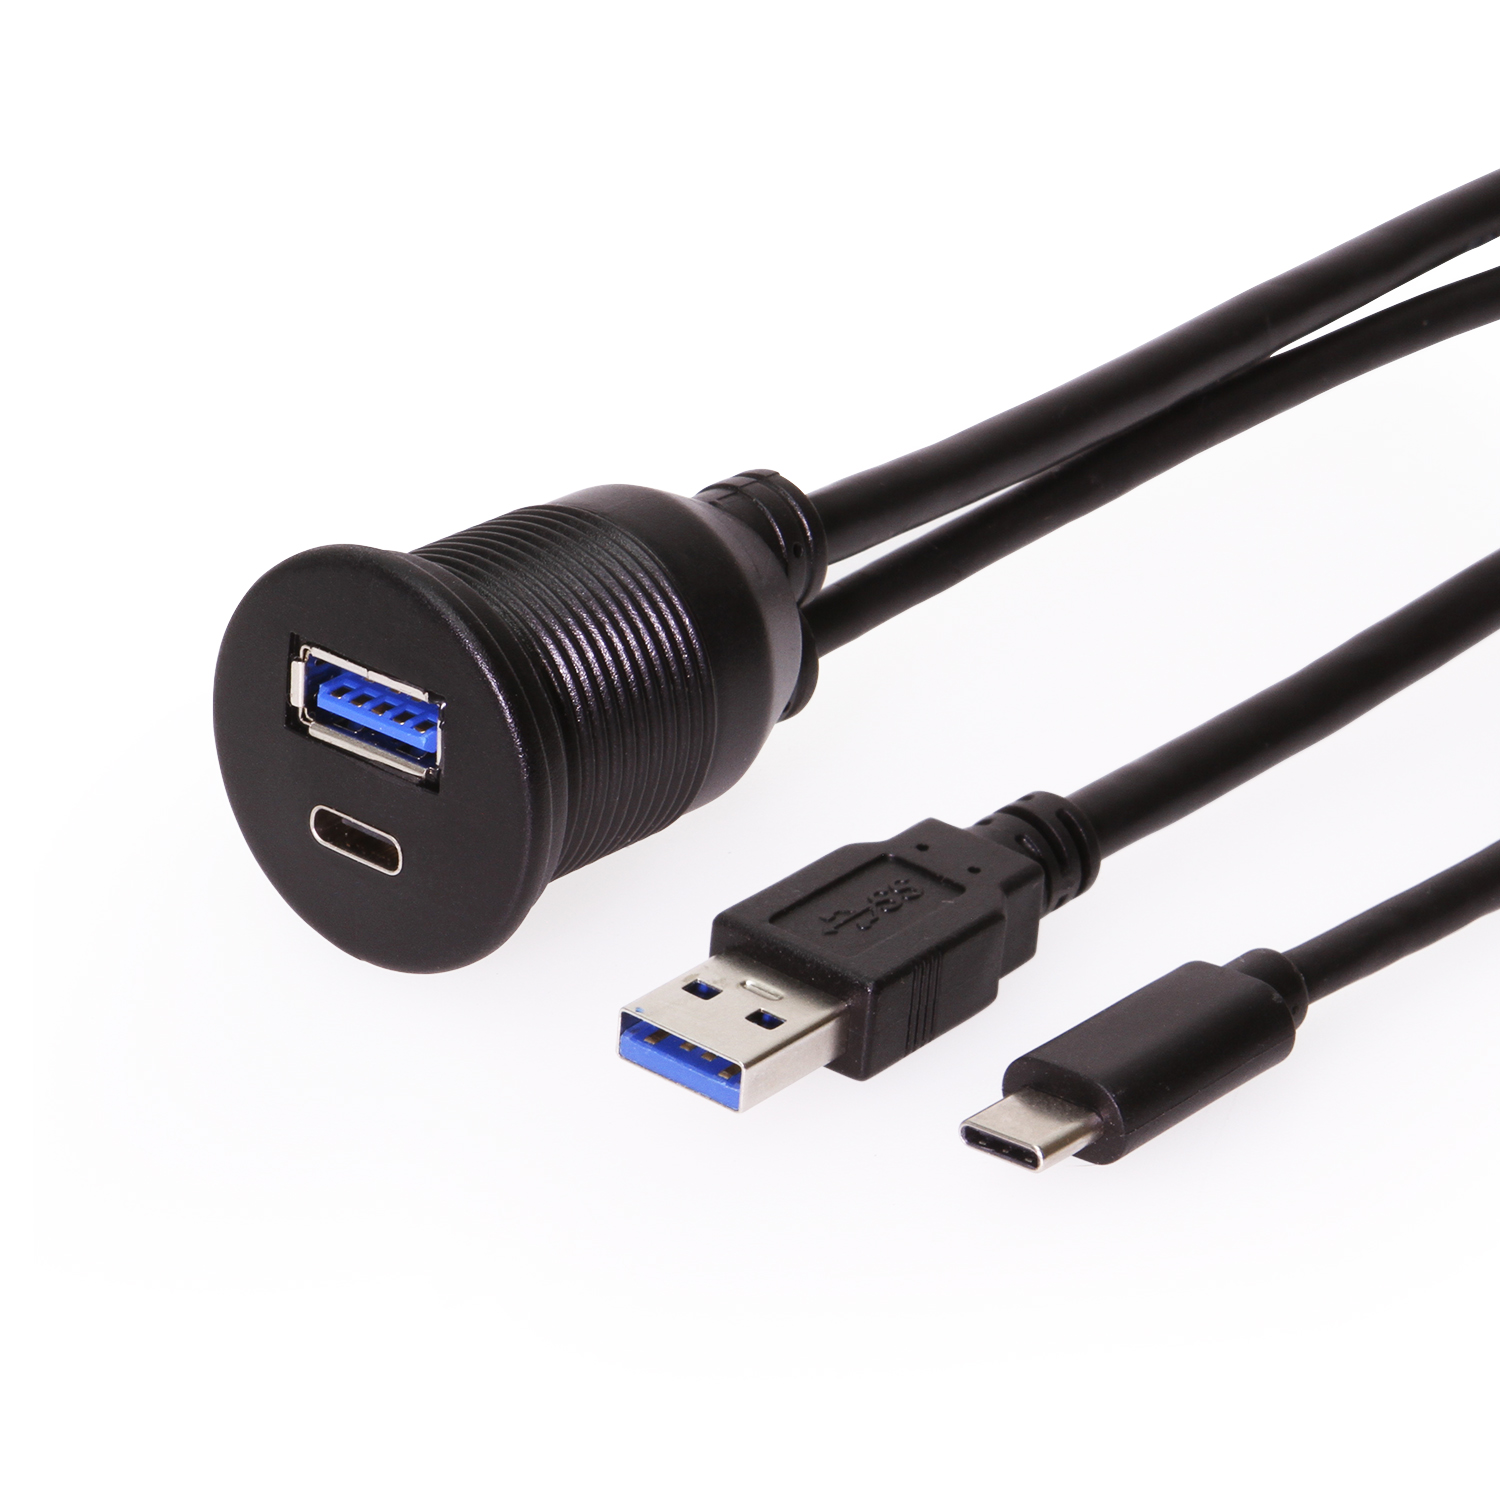 USB Extension Cables for Longer Distance Connections - Coolgear - Buy the  Best USB Extensions Online